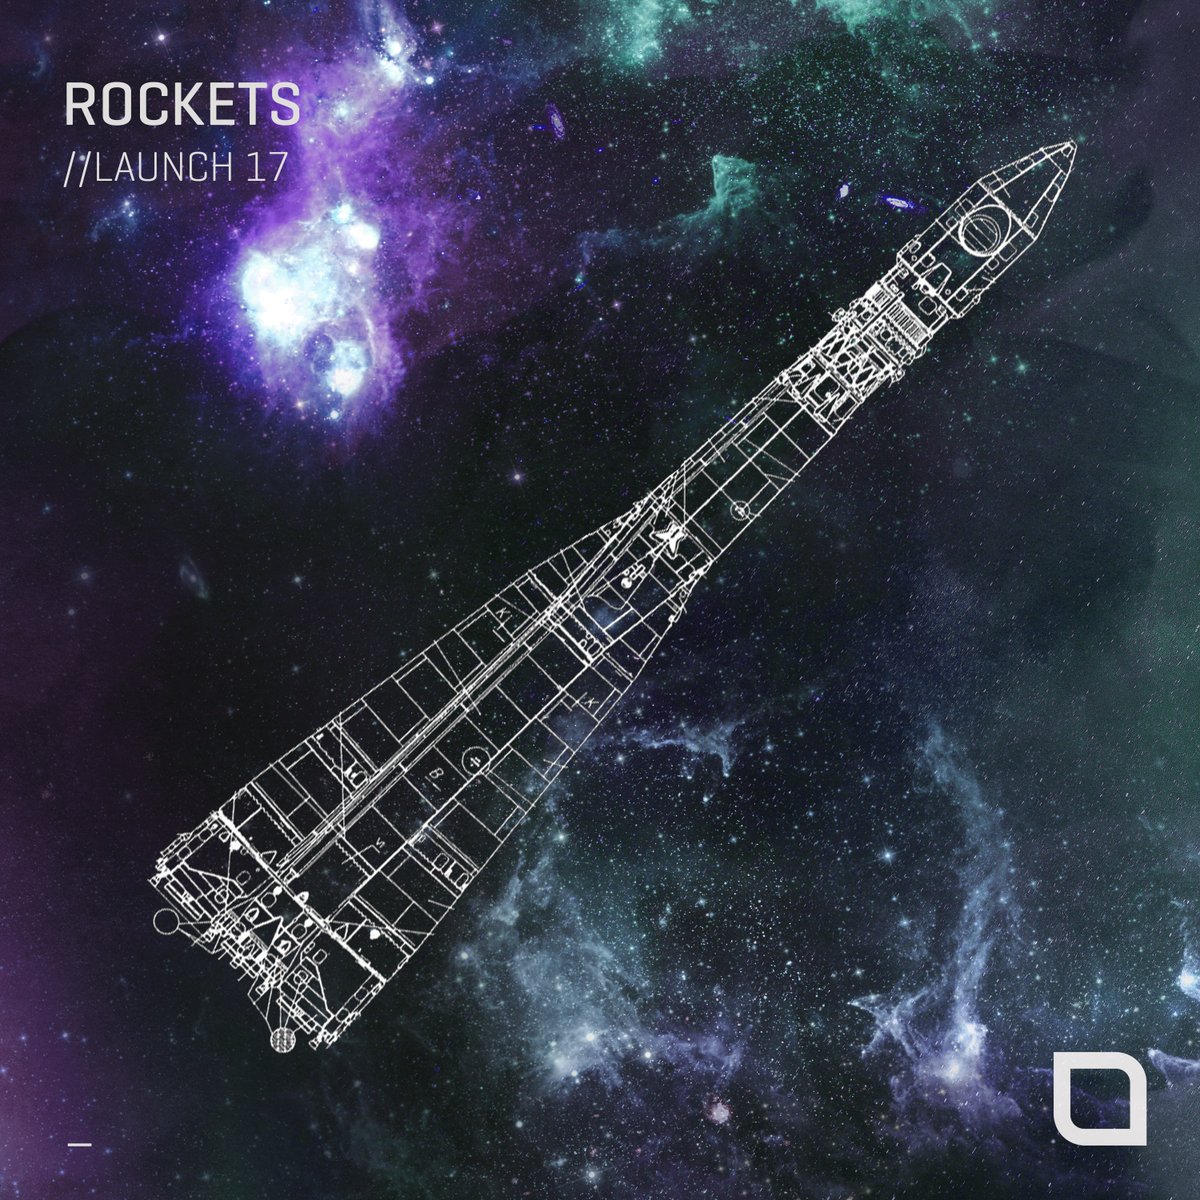 Prepare for an exhilarating sonic adventure through a diverse array of tracks, spanning from Jacking House to Peak Time Techno by new talent as well as well-known names on Tronic. The 17th edition of our Rockets V/A is here featuring 12 exclusive tracks. beatport.com/release/rocket…